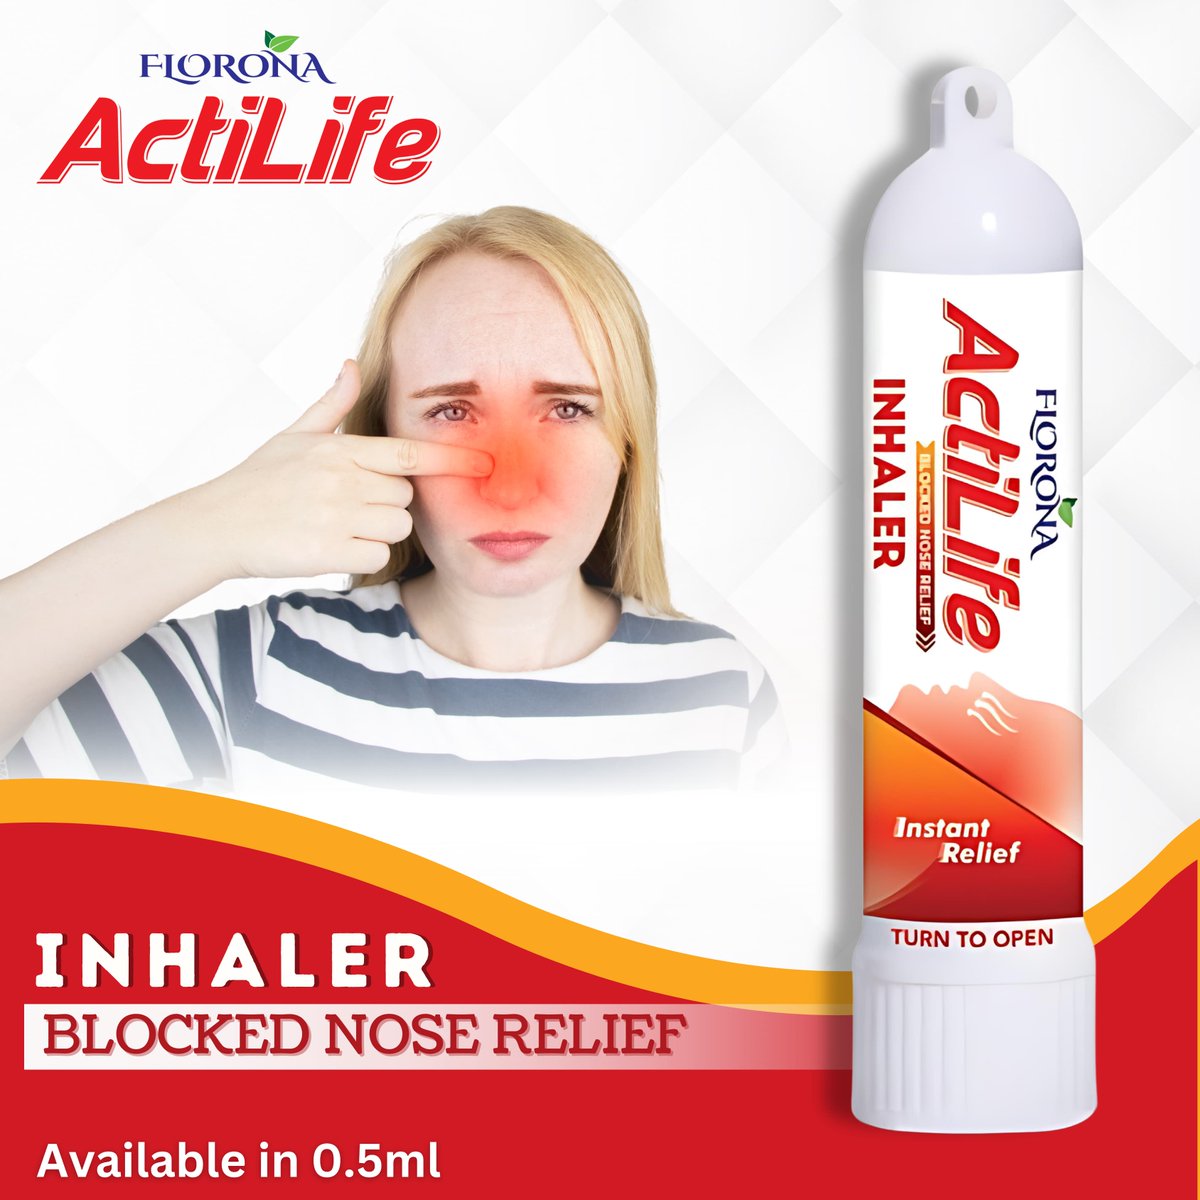 Clear your blocked nose instantly with FLORONA ACTILIFE INHALER. Easy to use and carry, perfect for on-the-go relief
Available in 0.5ml
#onestlimited #onestbrands #inhaler #blockednoserelief #blockednose #instantrelief #branding #actilife #floronaactilife #florona #fmcg #exporter